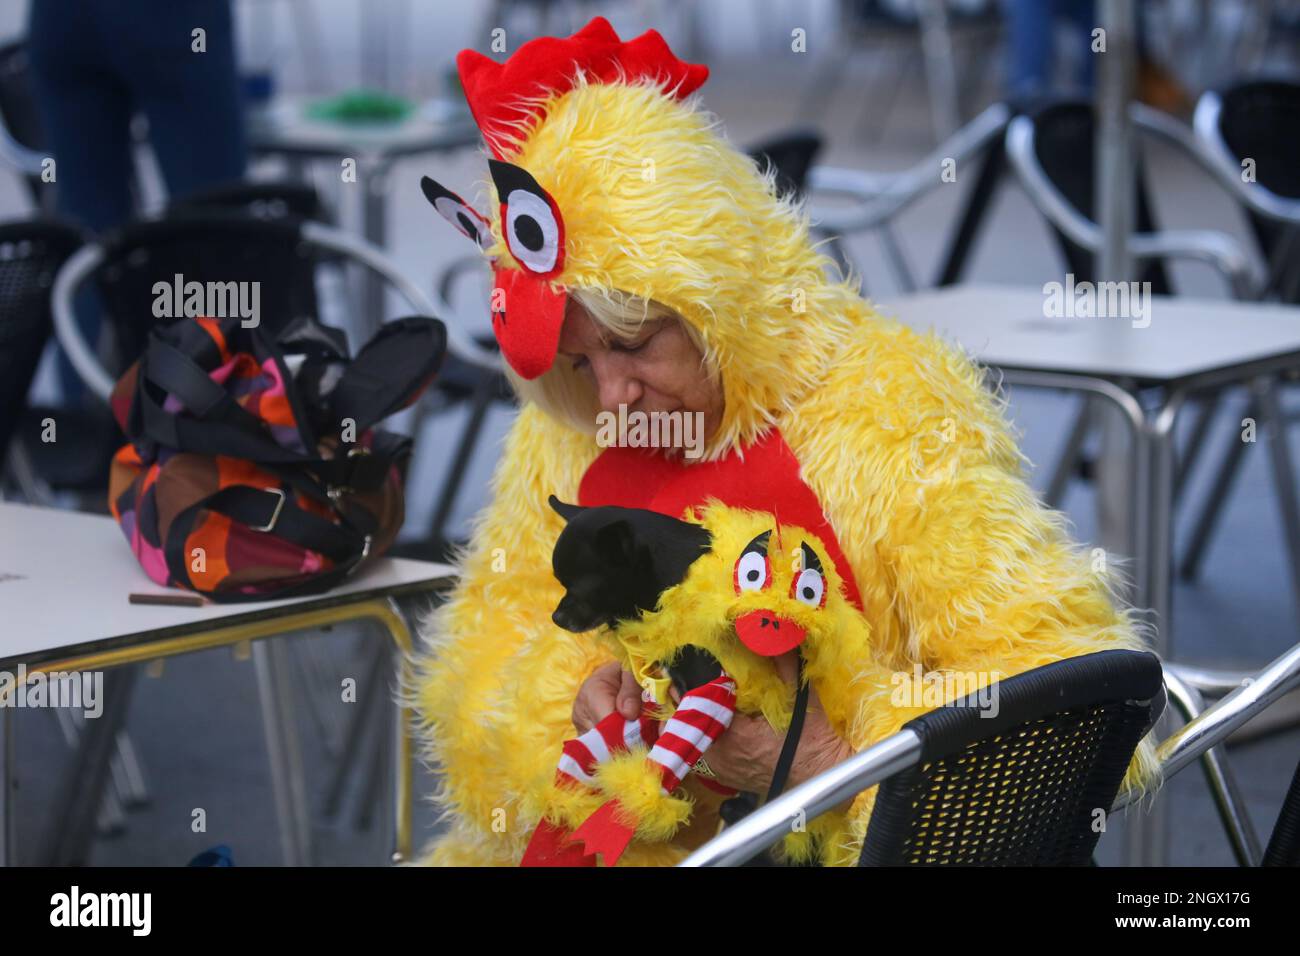 Aviles, Spain, 19th February, 2023: A lady and her dog dressed as chickens during the Antroxaes Mascot Contest on February 18, 2023, in Aviles, Spain. Credit: Alberto Brevers / Alamy Live News Stock Photo